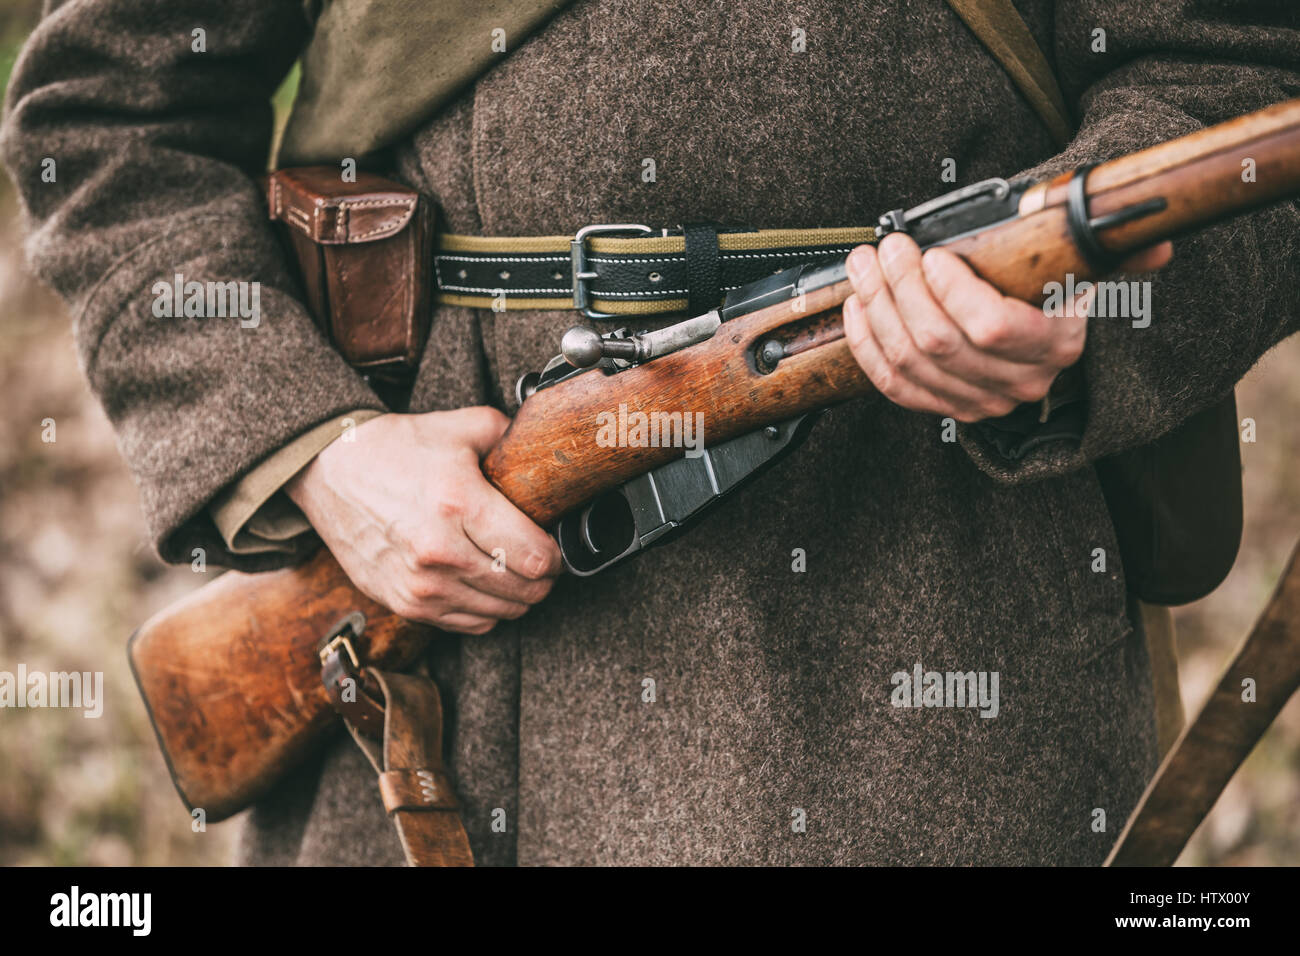 Re-enactor Dressed As Russian Soviet Infantry Soldier Of World War II Holds Rifle Weapon In Hands. Stock Photo